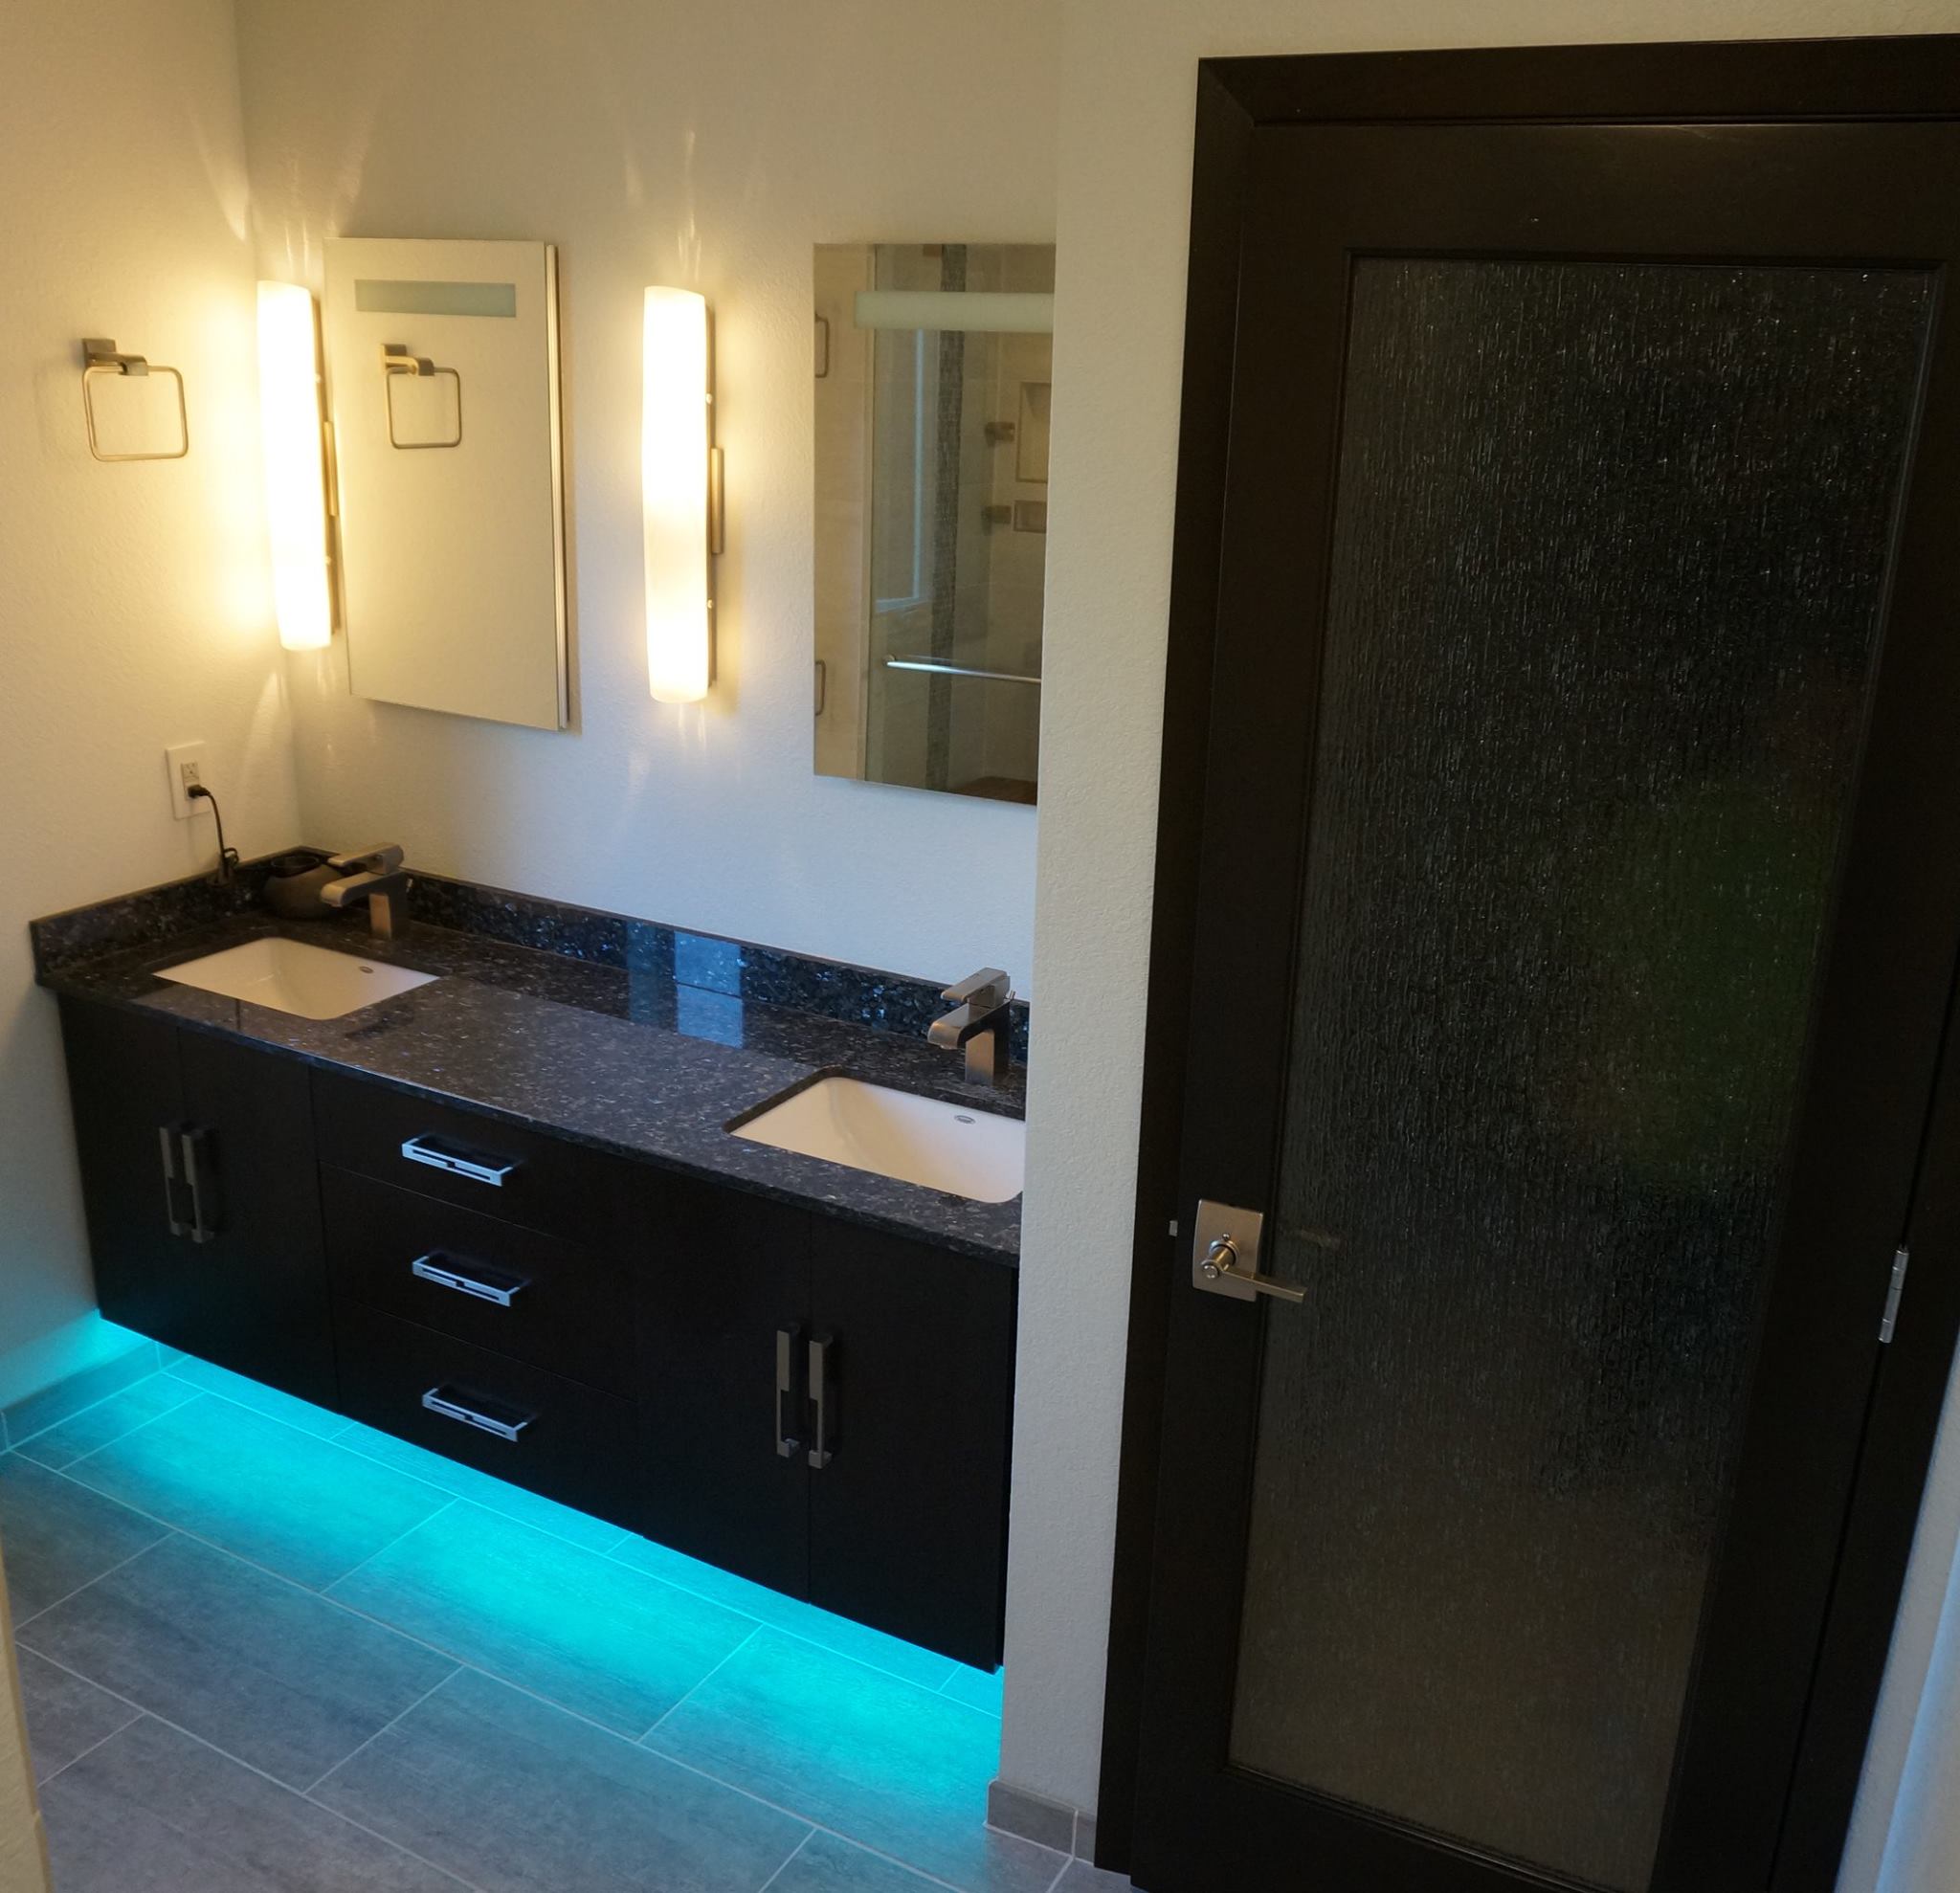 Bathroom with interesting blue recessed lighting underneath cabinets